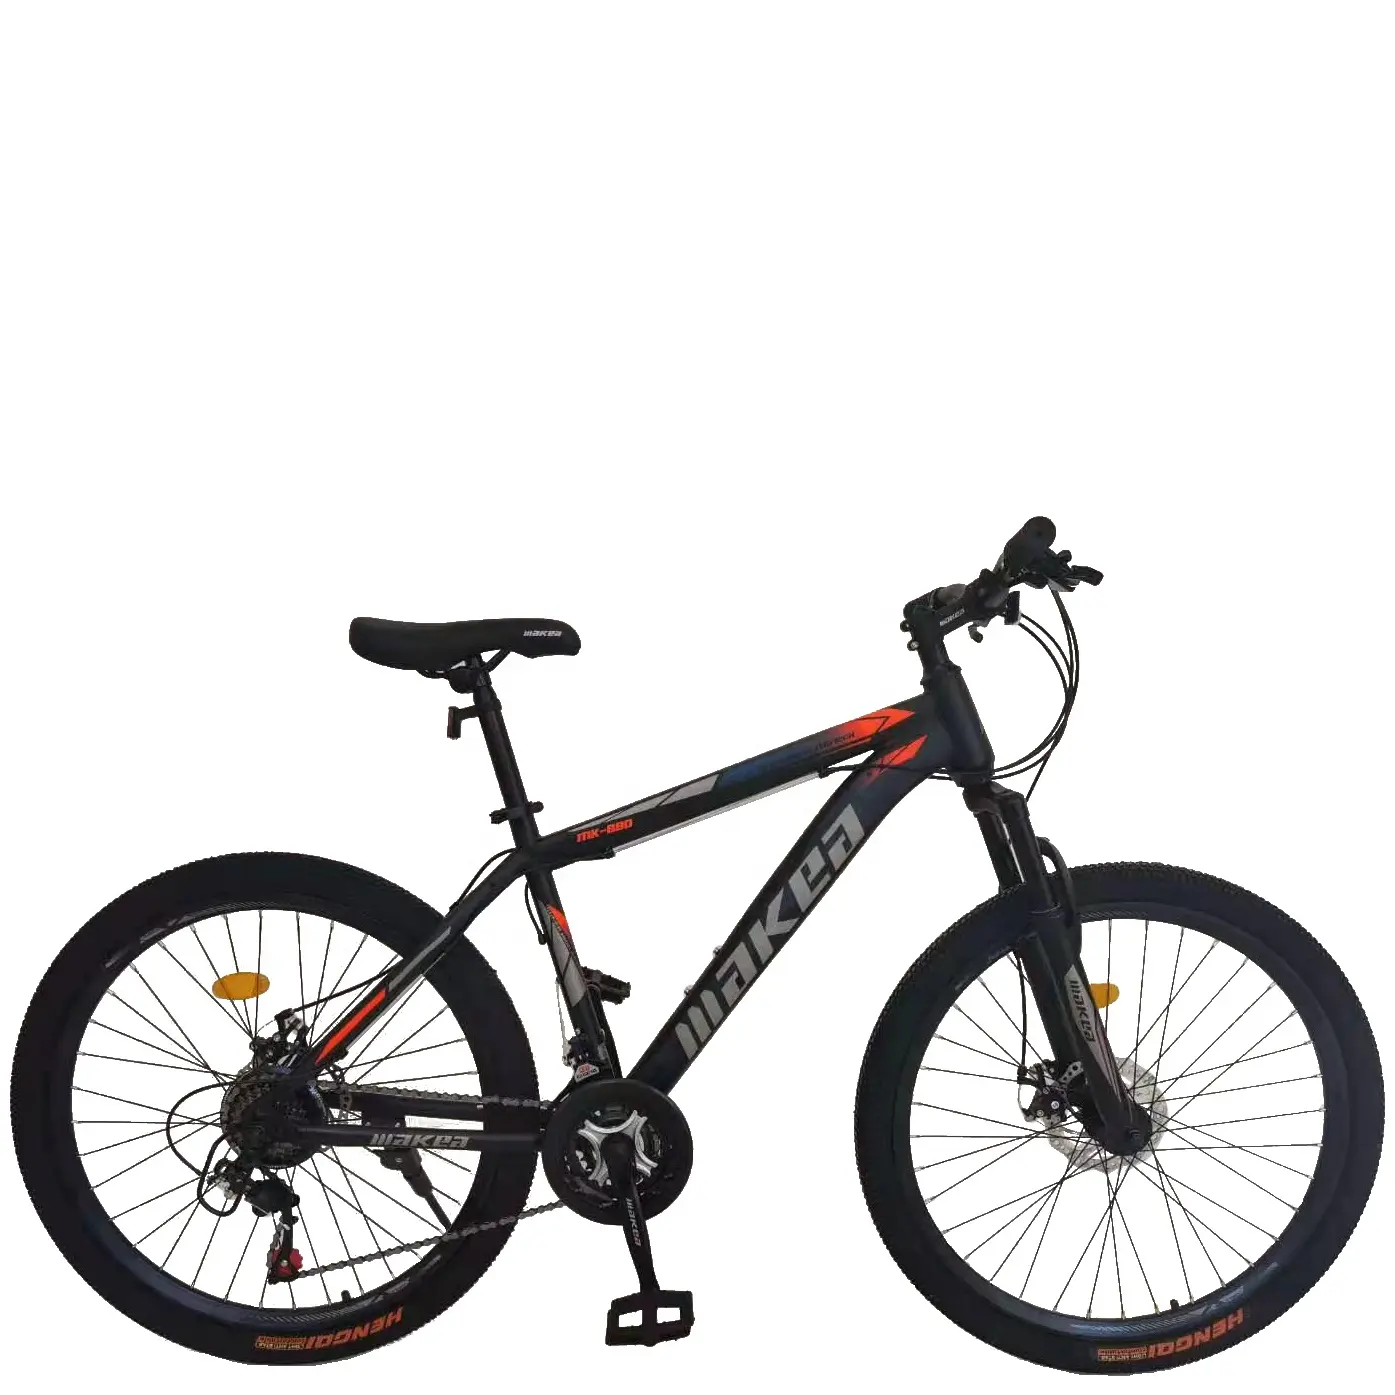 Cheapest 29 inch shimano 21 speed alloy mountain bike for sale / fast delivery 29 er size mtb mountain bike 29er mountain cycle